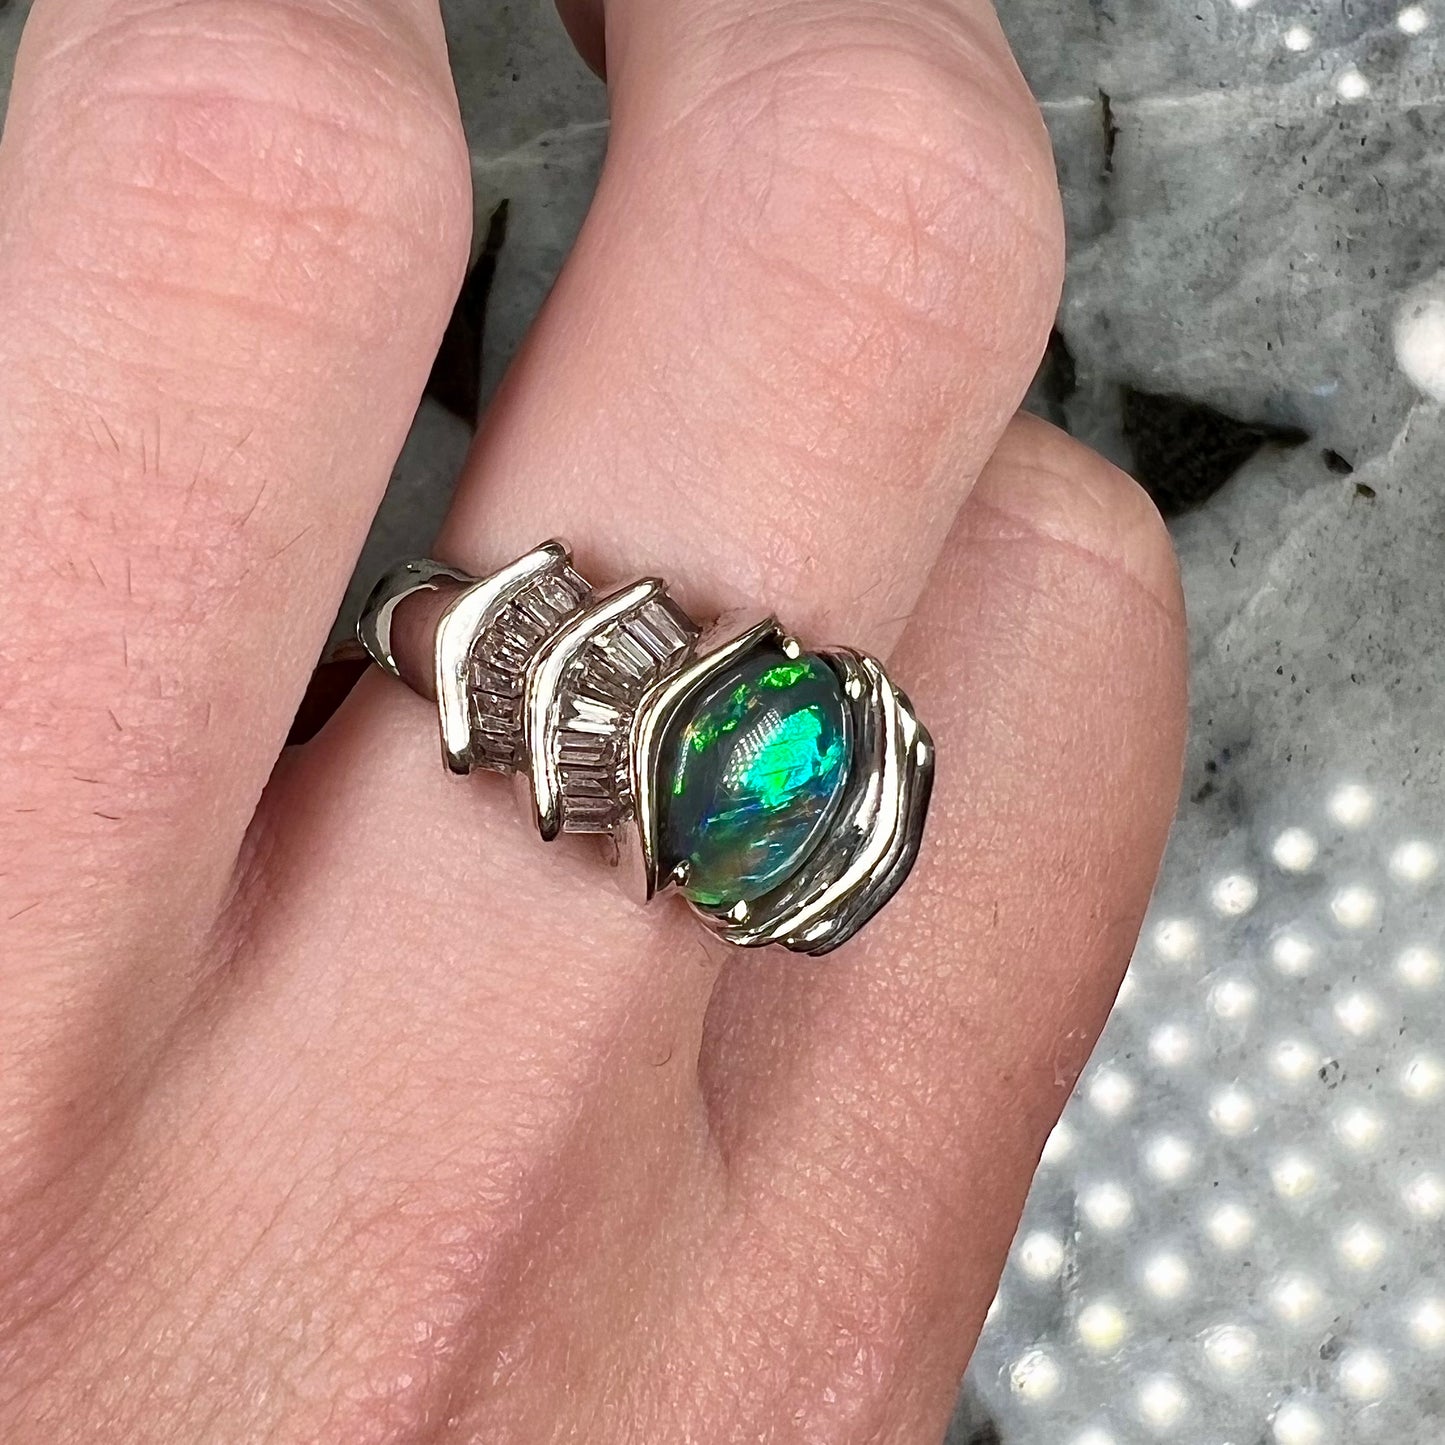 A white gold ring set with a Lightning Ridge black opal and baguette cut diamonds.